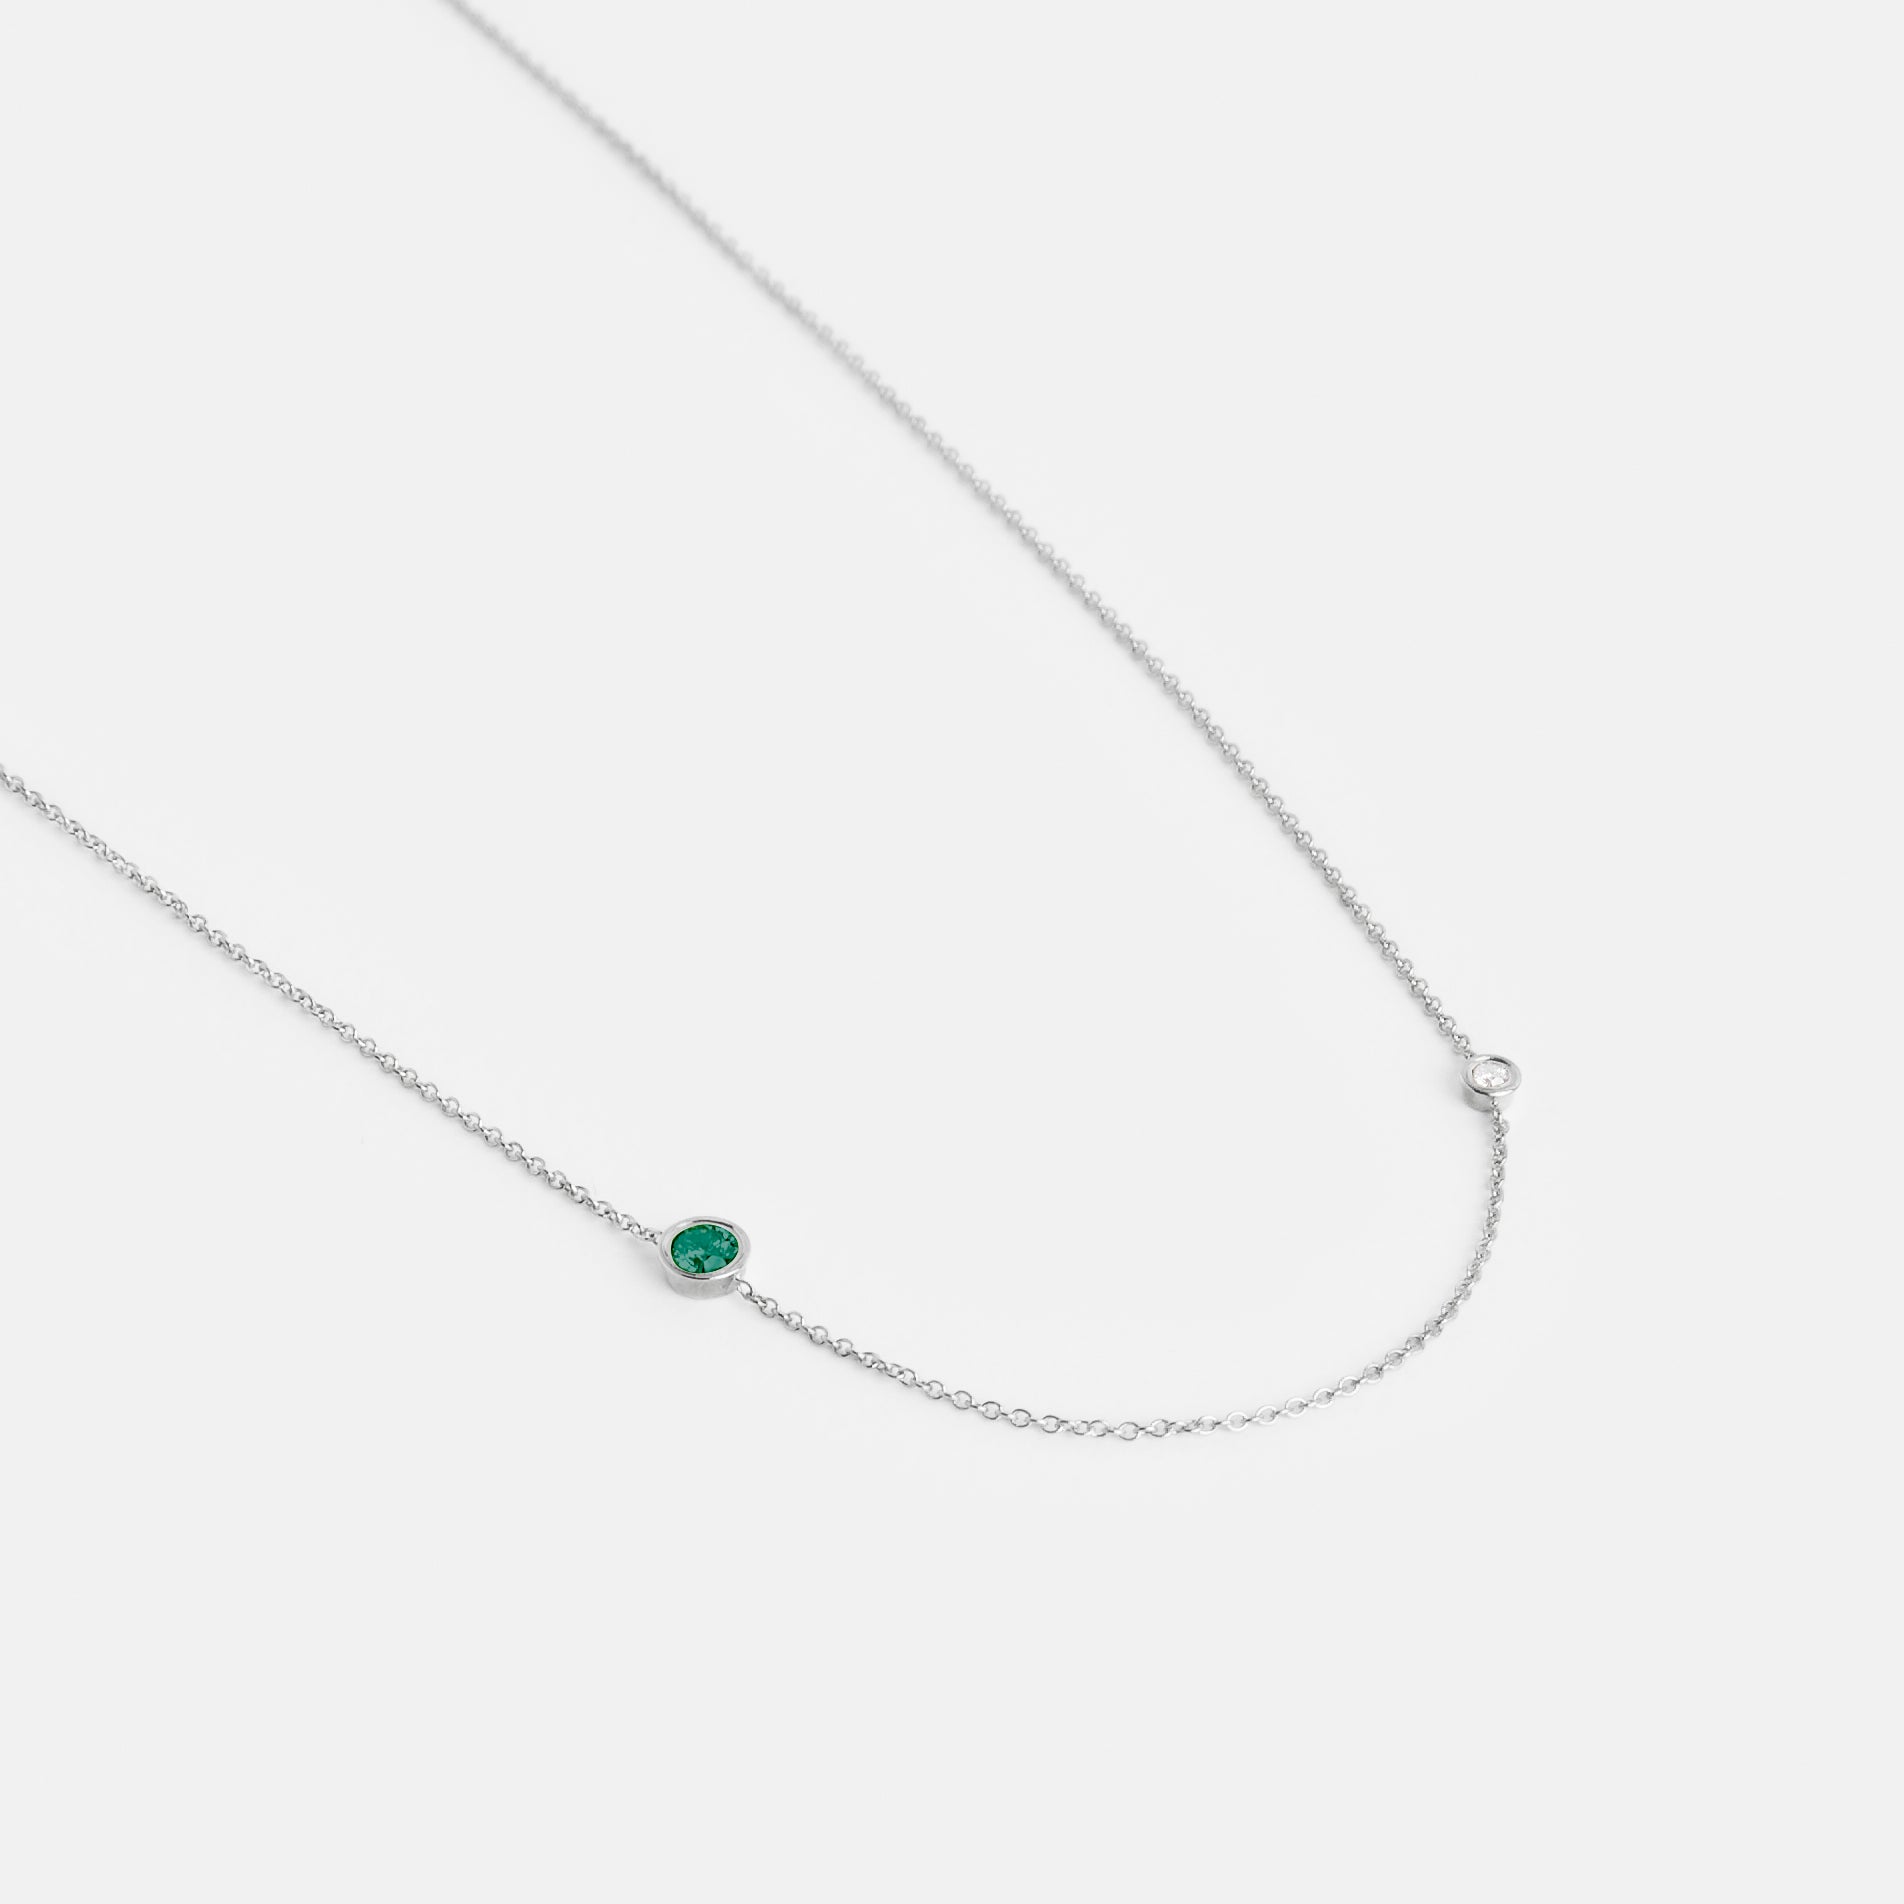 Iba Minimalist Necklace in 14k White Gold set with White Diamond and Emerald By SHW Fine Jewelry NYC